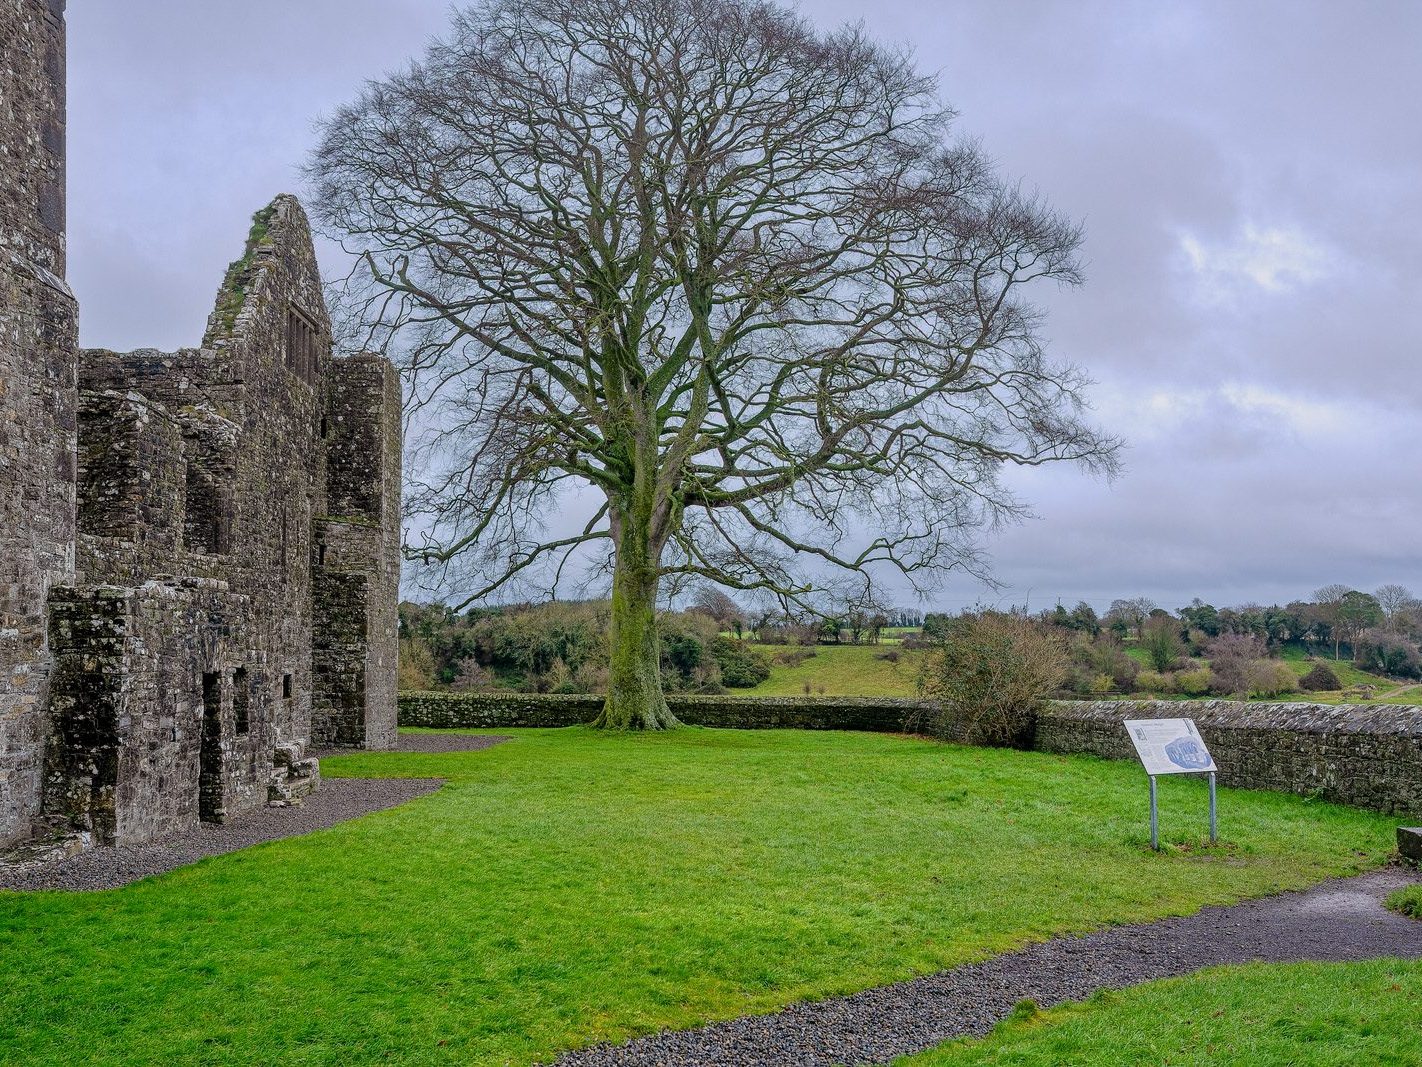 BECTIVE ABBEY WHICH I VISITED LAST CHRISTMAS [THERE WERE NO OTHER VISITORS AS IT WAS A VERY WET DAY]--225253-1